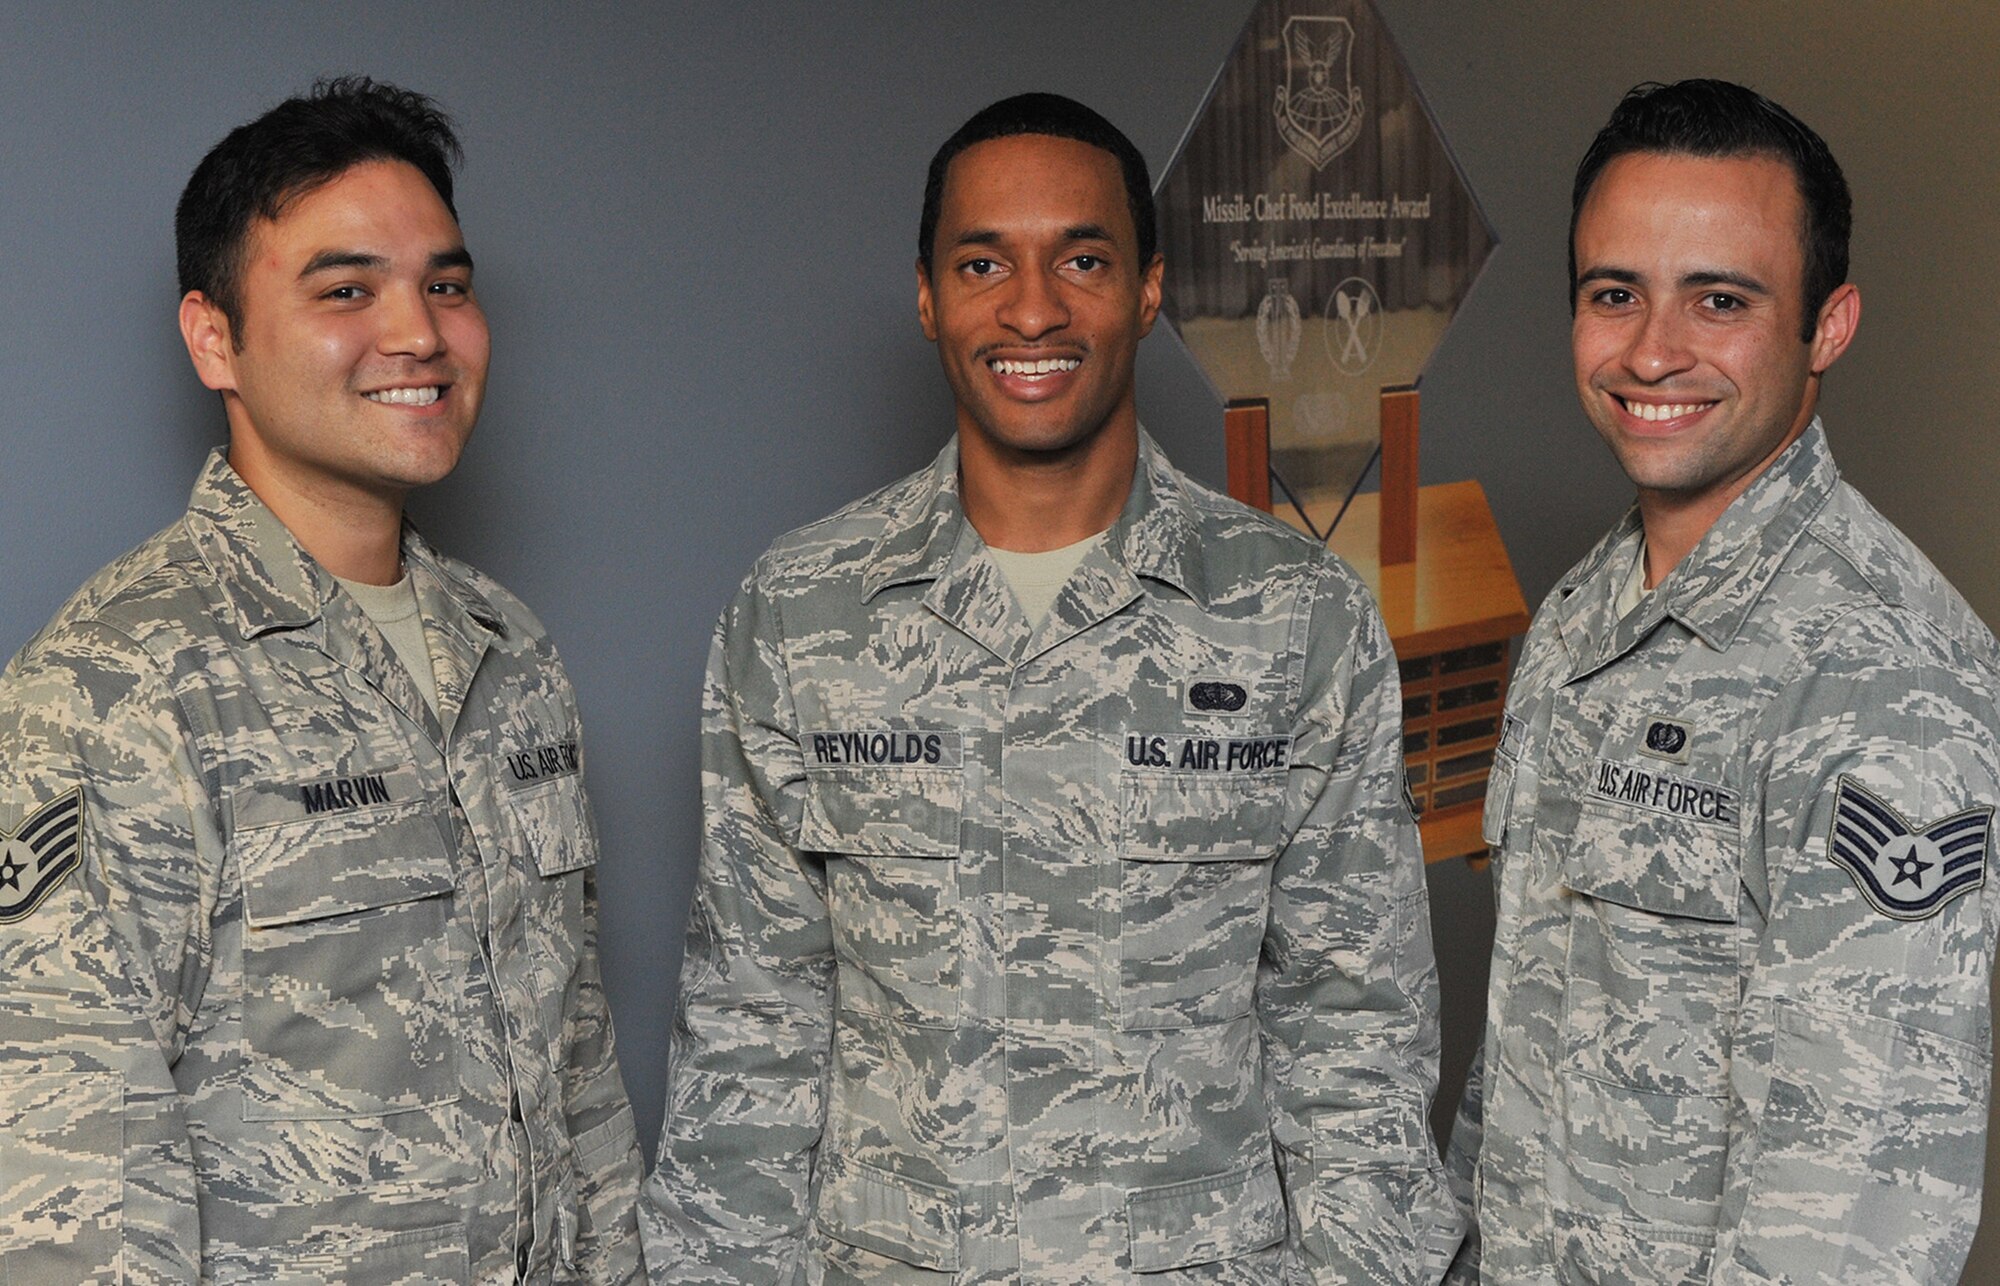 The 341st Missile Wing’s Global Strike Challenge 2015 Outstanding Chef Competition team poses Sept. 22 at Malmstrom Air Force Base, Mont. From left to right are Staff Sgts. Stephen Marvin, team member; Justin Reynolds, team captain; and Derek Cruz, team member. All are from the 341st Force Support Squadron and will compete Oct. 7, 2015, at Barksdale Air Force Base, La. (U.S. Air Force photo/John Turner)